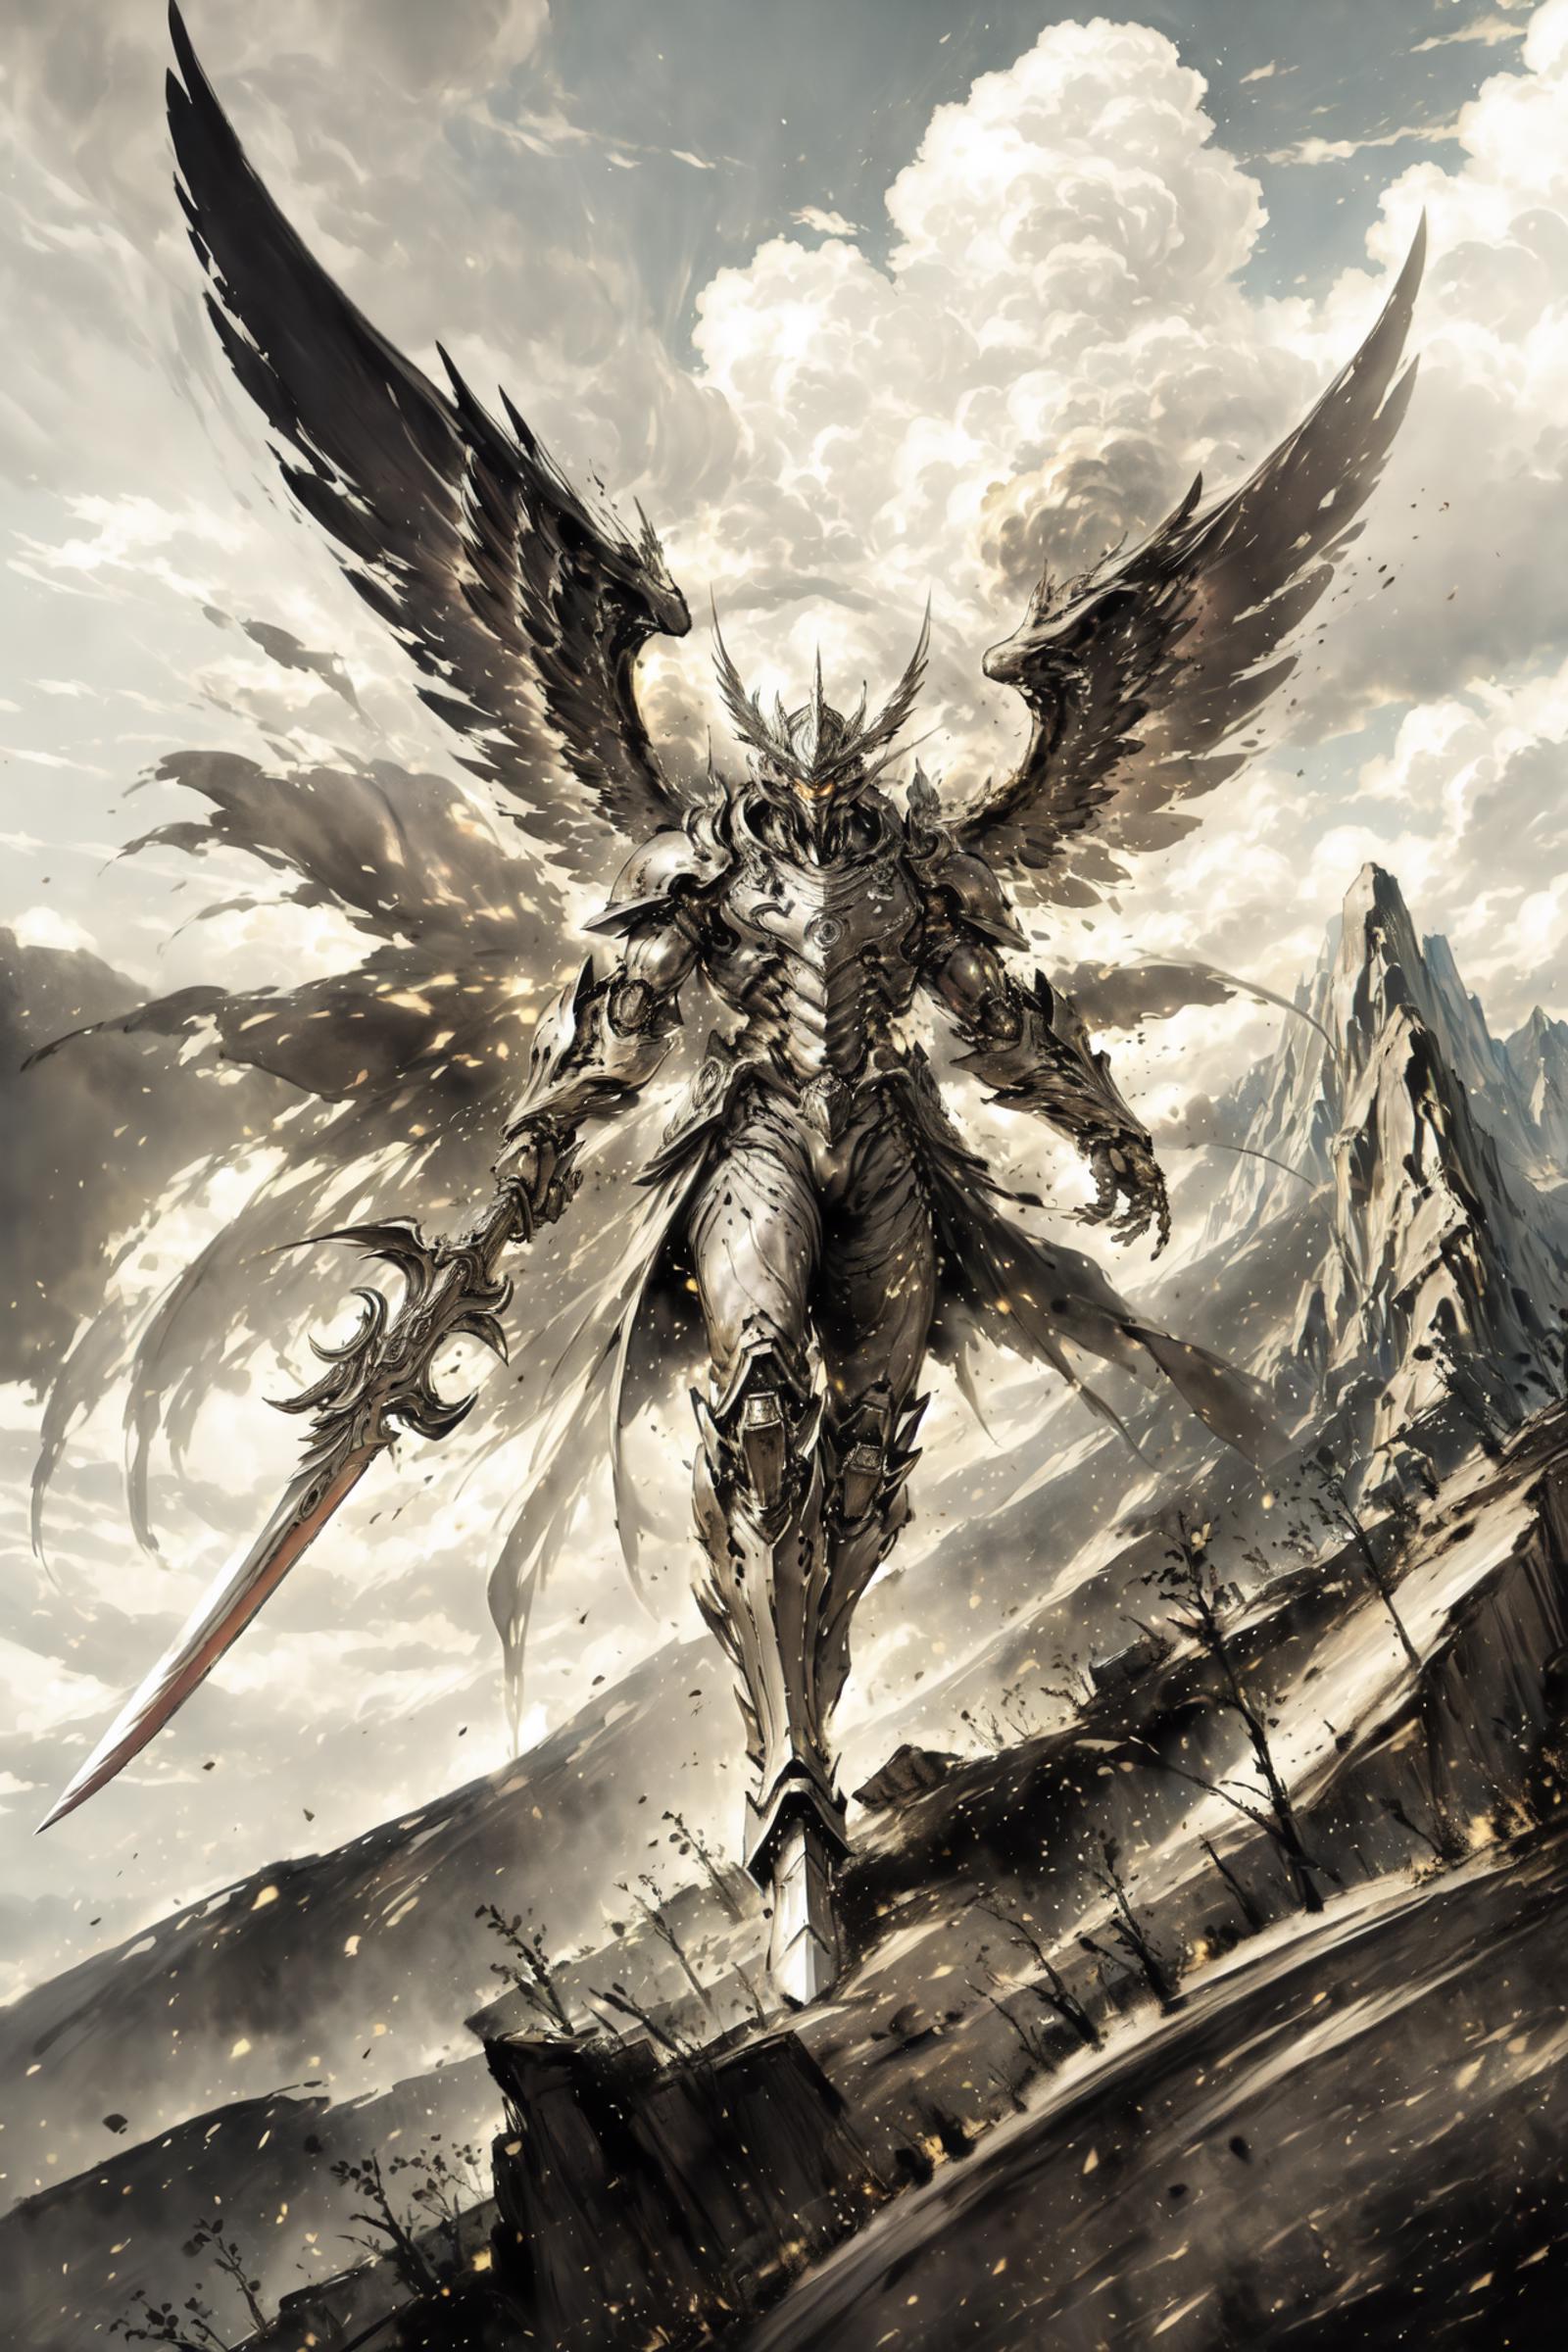 An angelic figure with wings and a sword stands in front of a mountain.